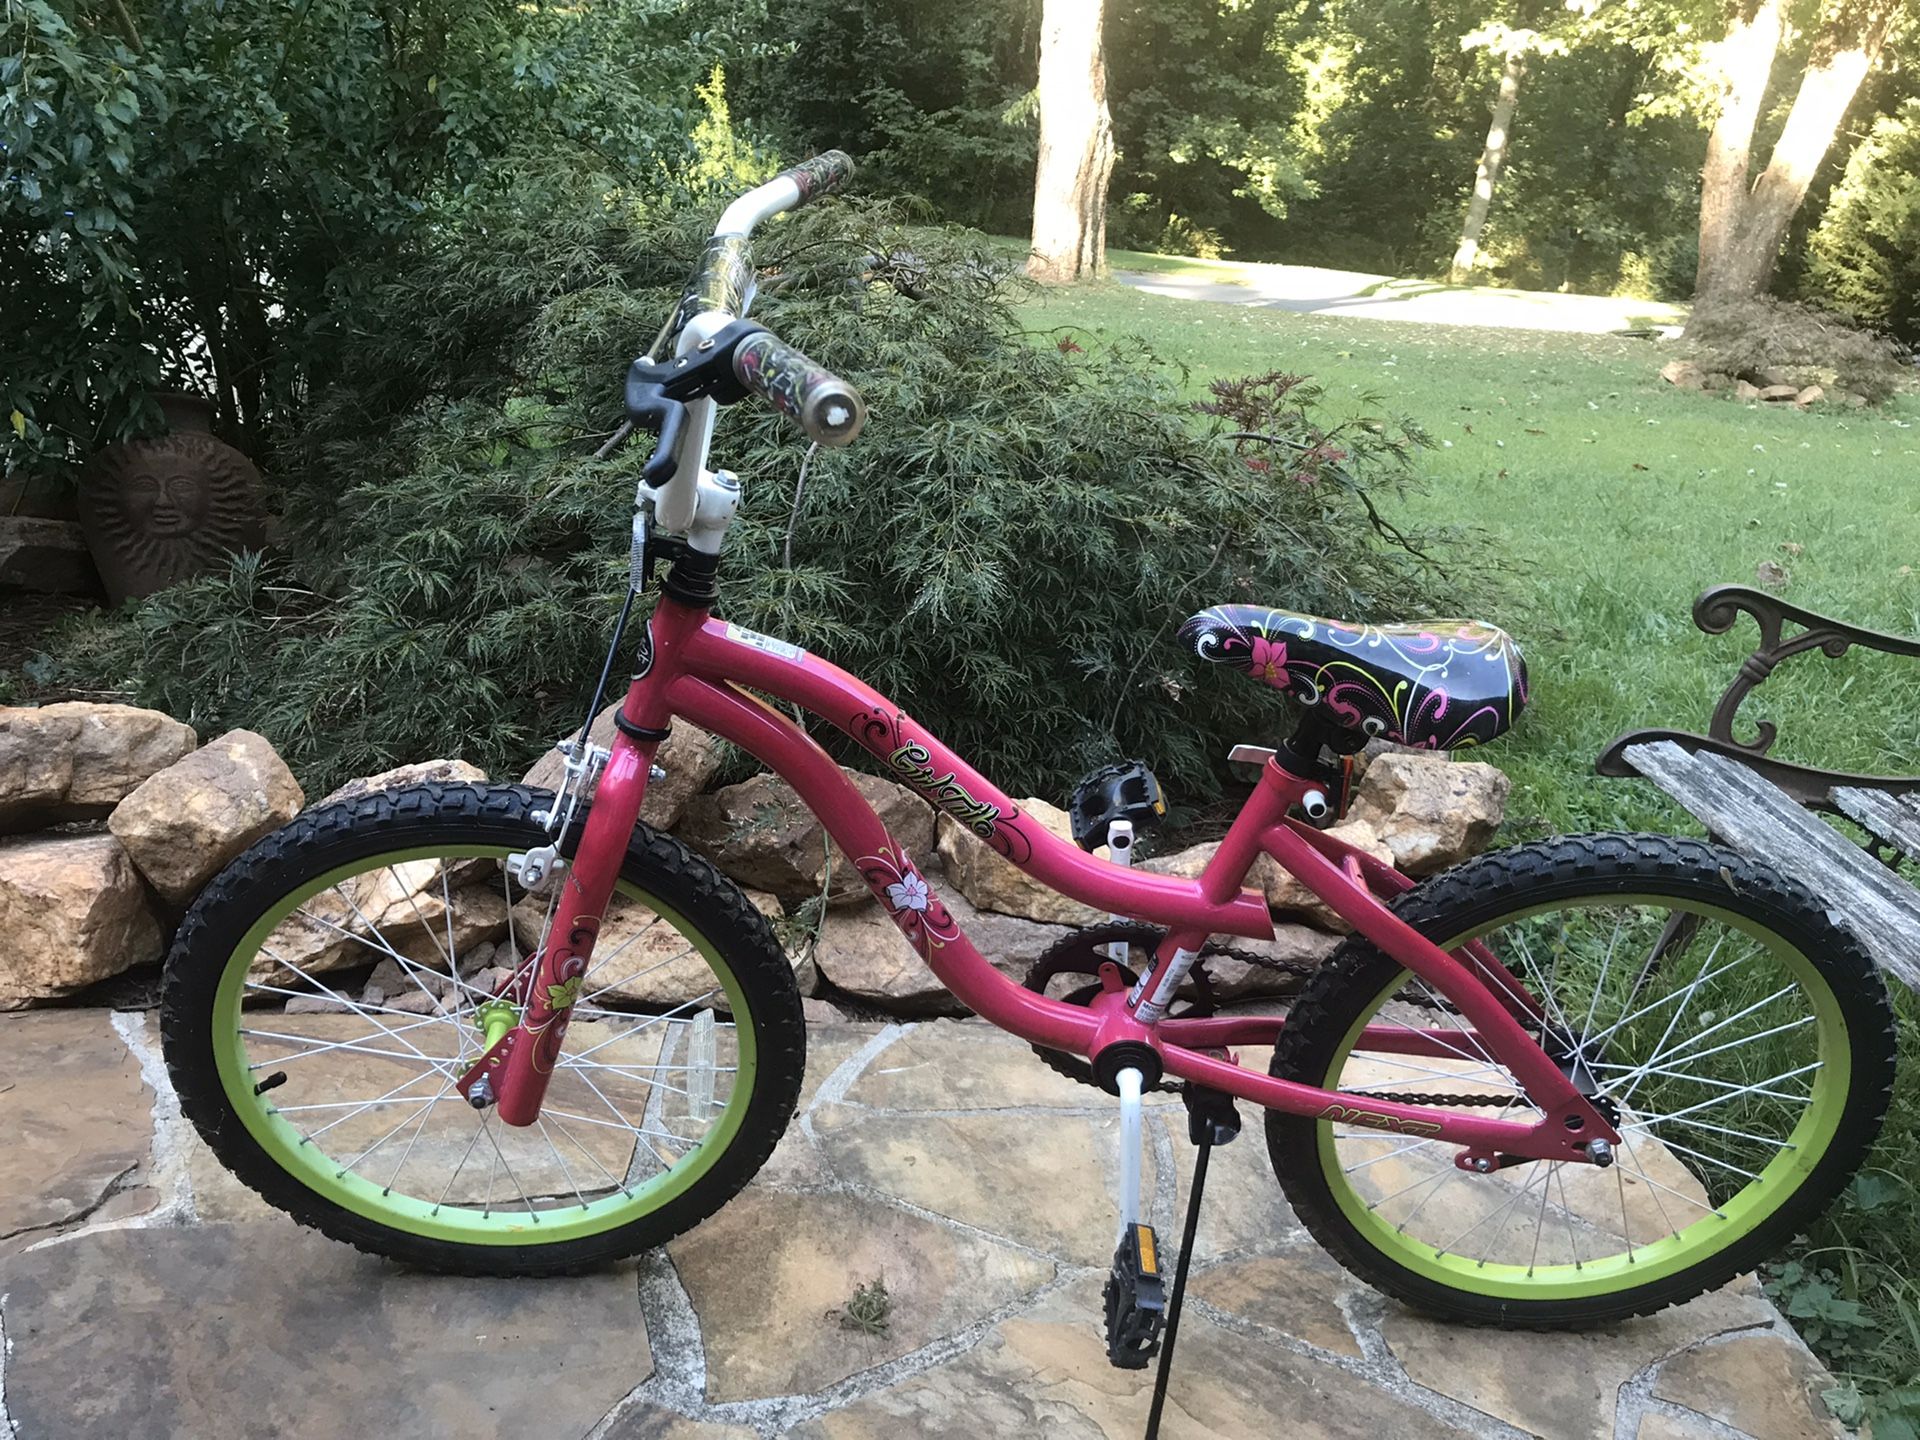 16” bike used good condition must pick up in Kennesaw off wade green road please serious buyers only